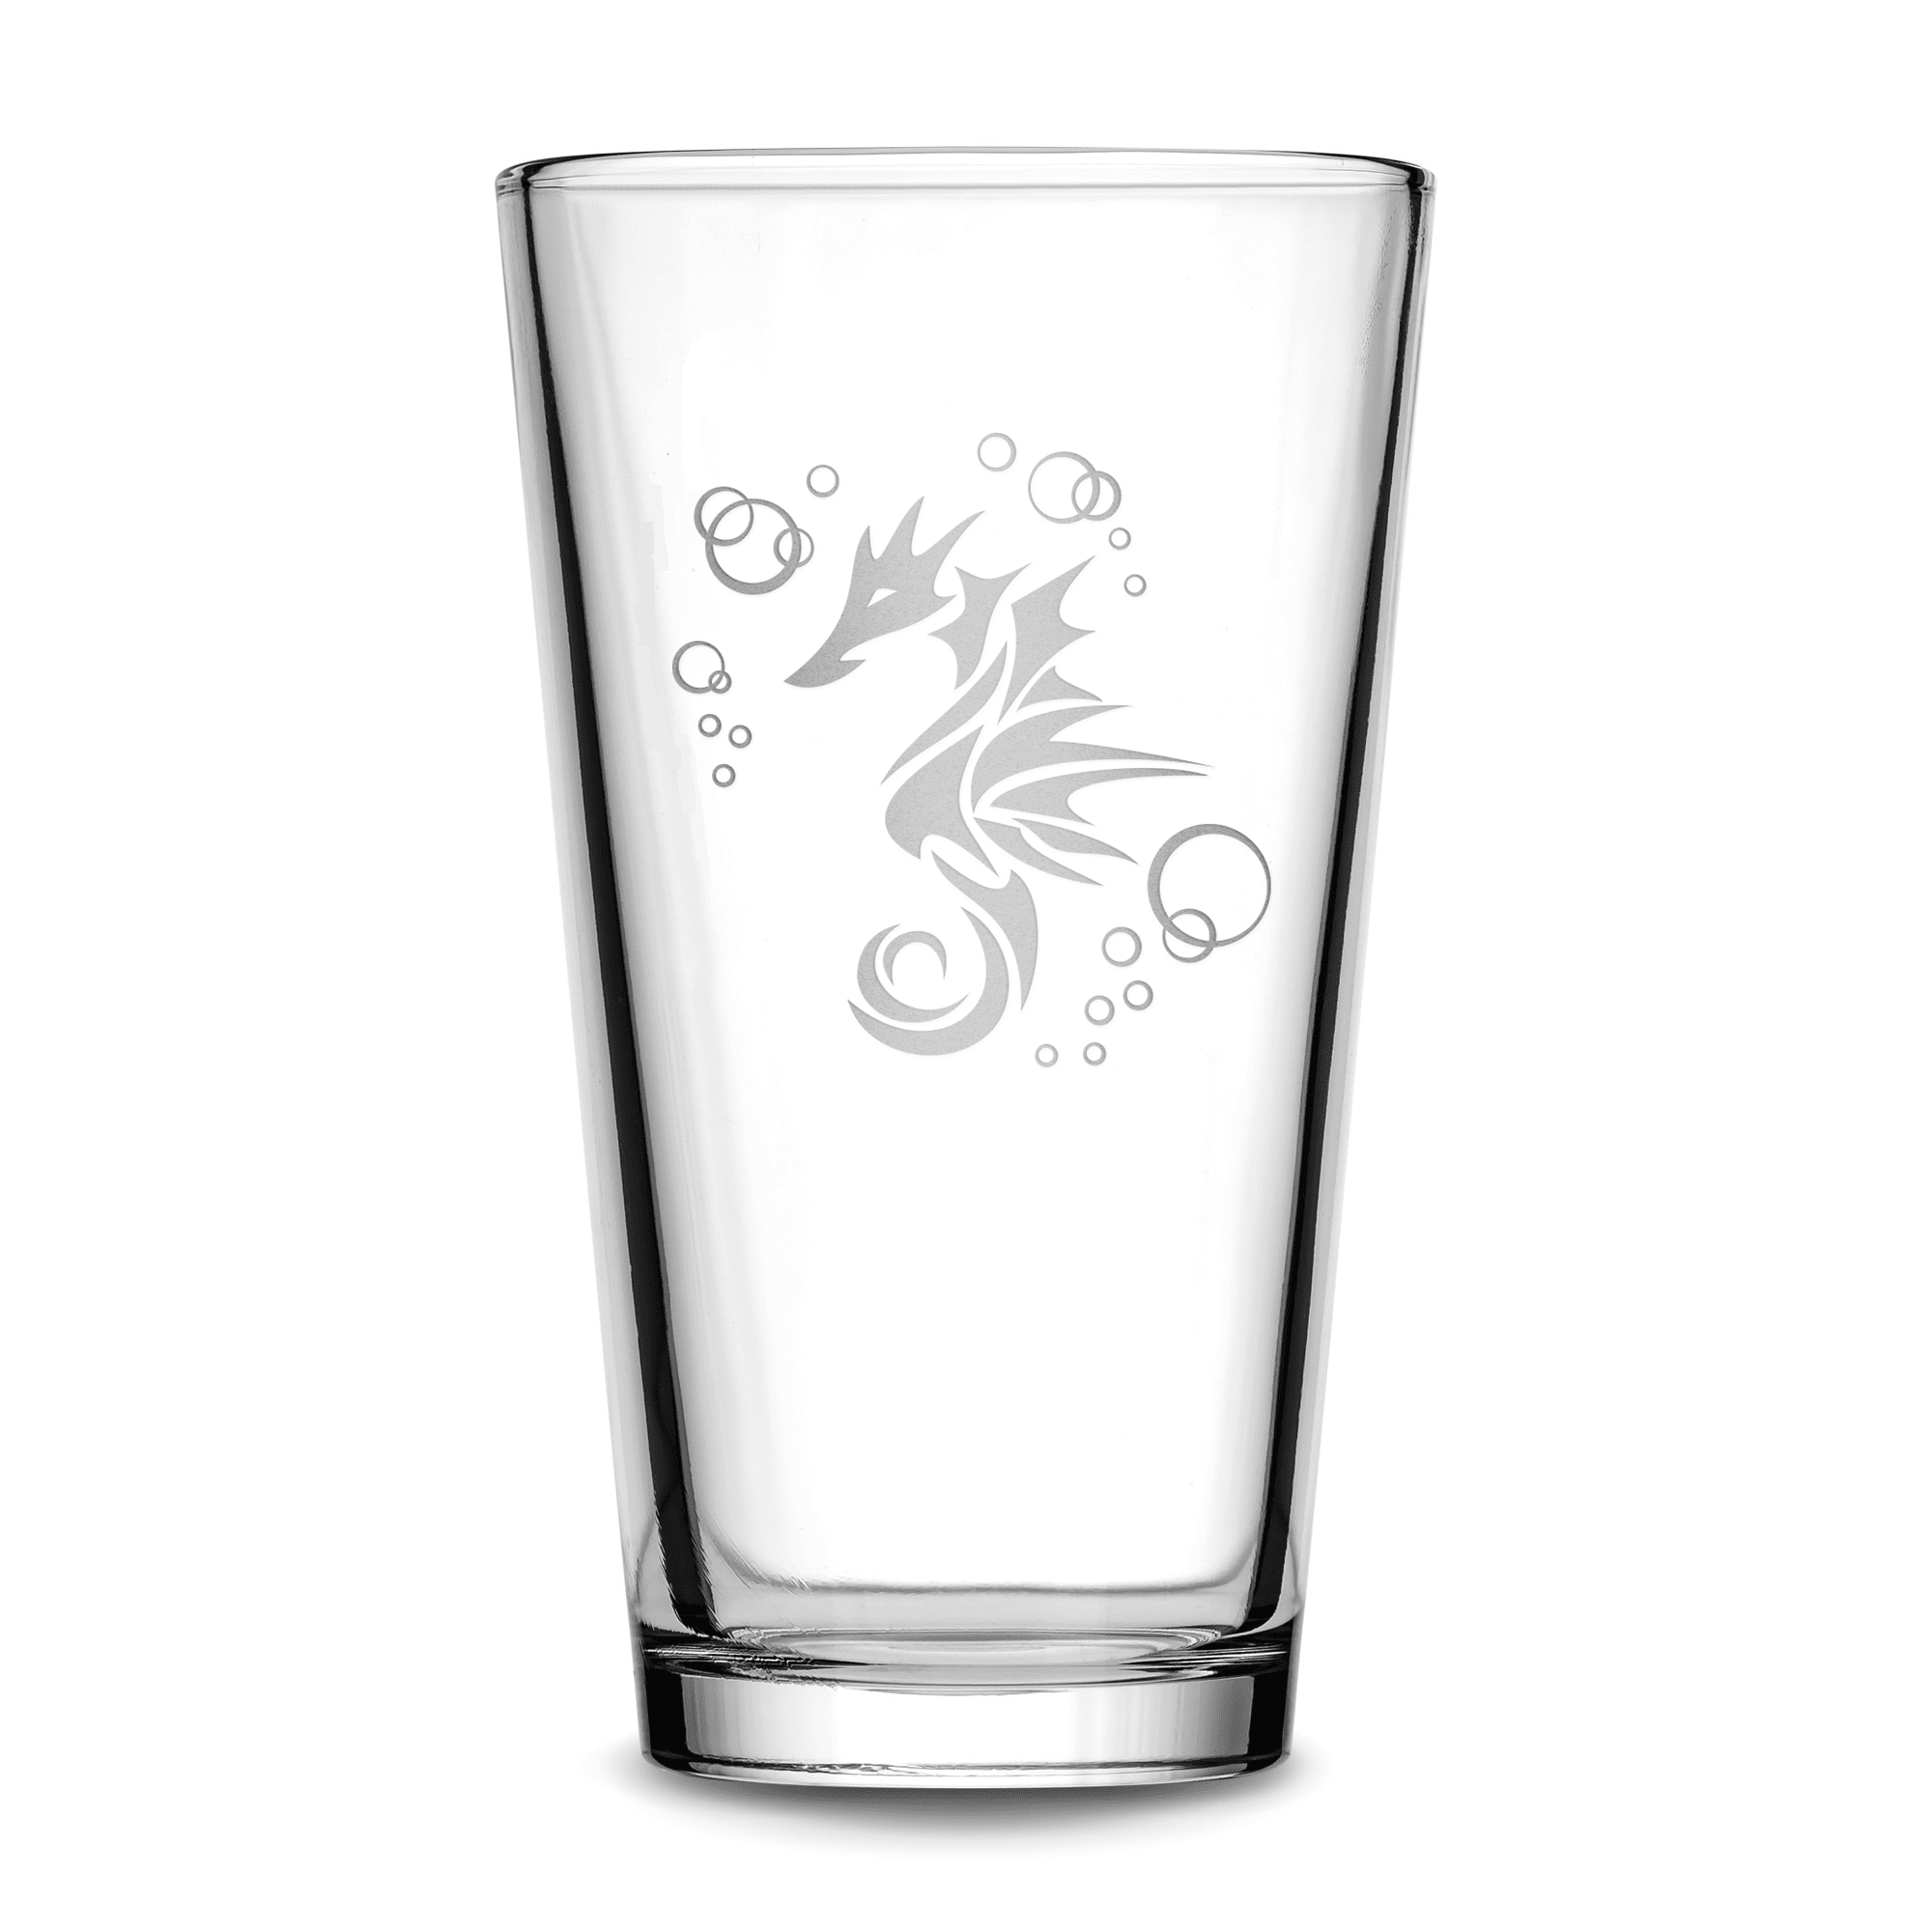 Premium Pint Glass, Seahorse Design, Deep Etched, 16oz by Integrity Bottles